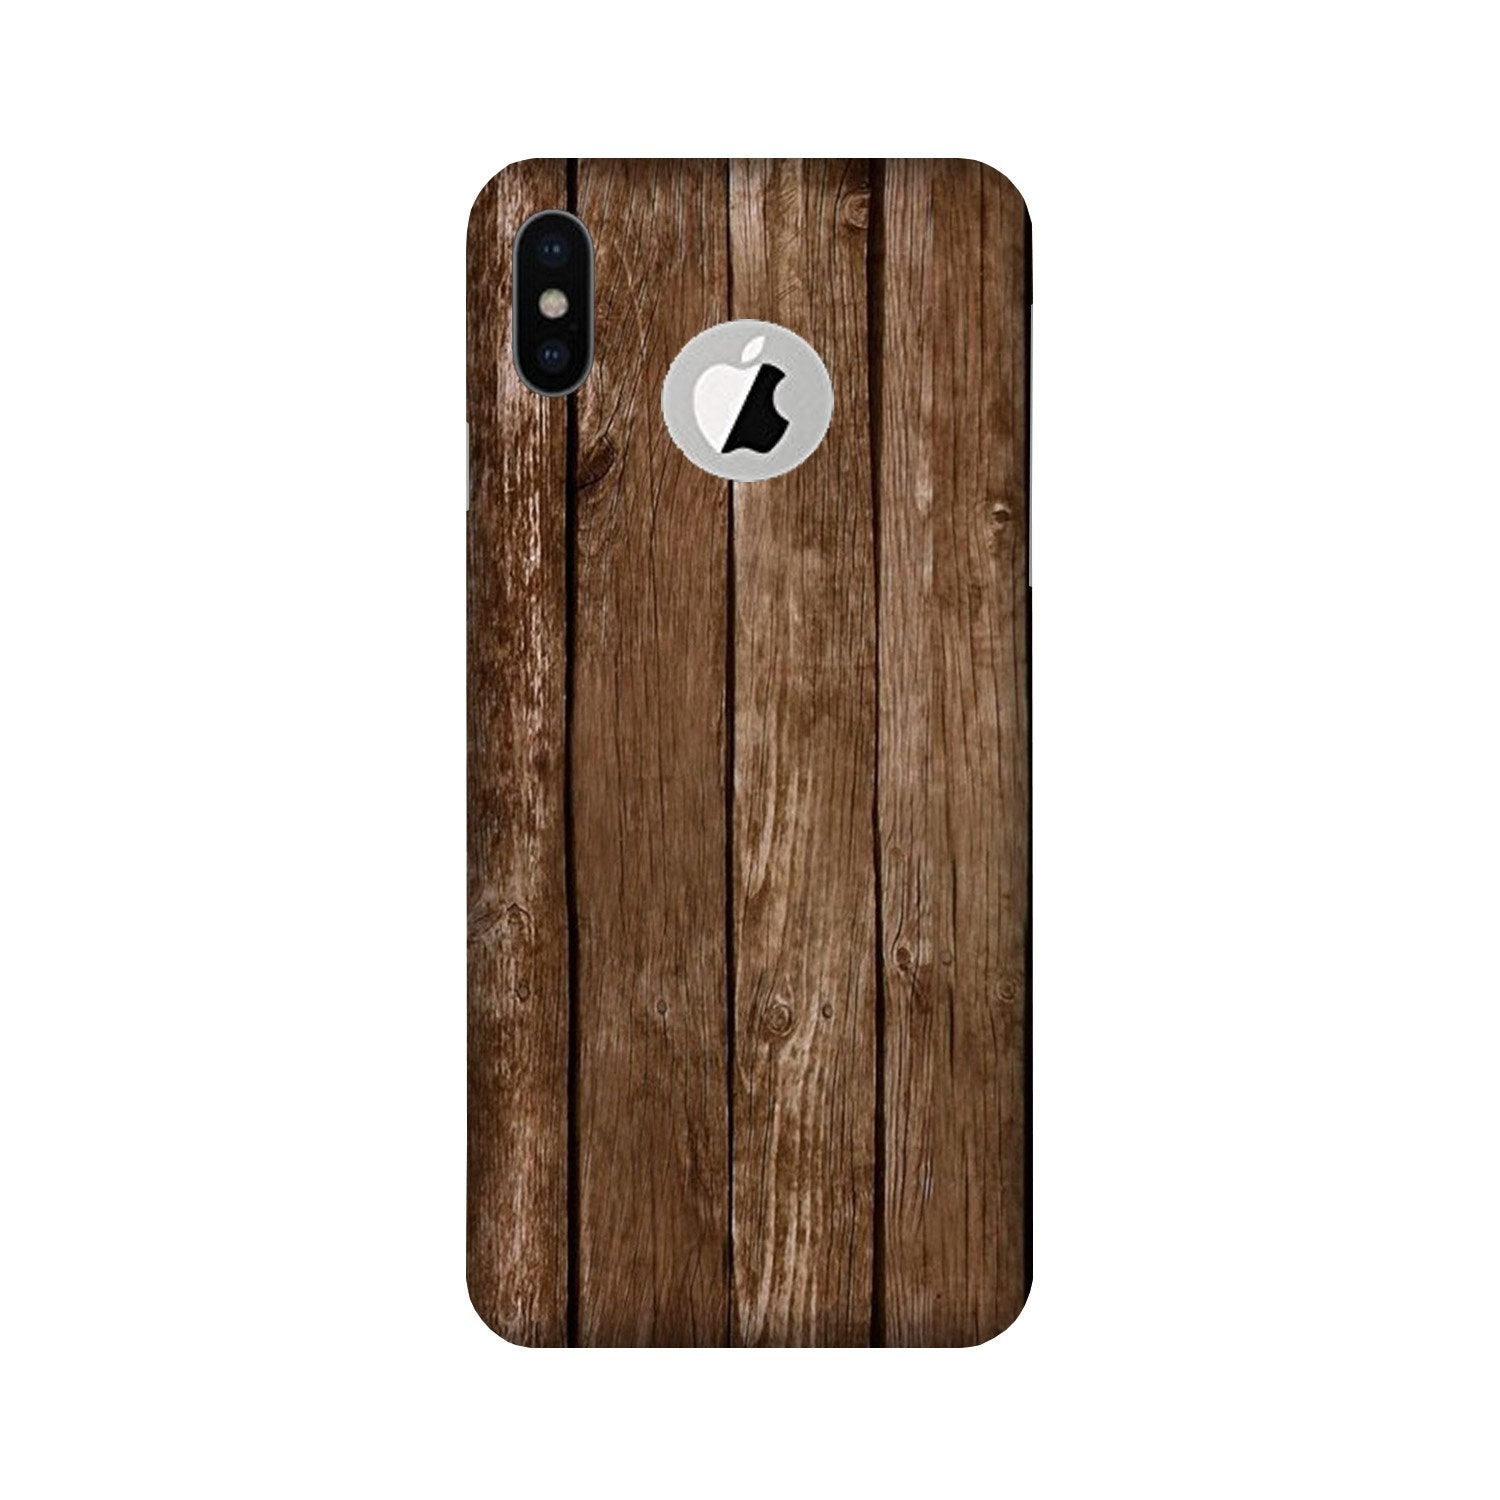 Wooden Look Case for iPhone Xs logo cut (Design - 112)